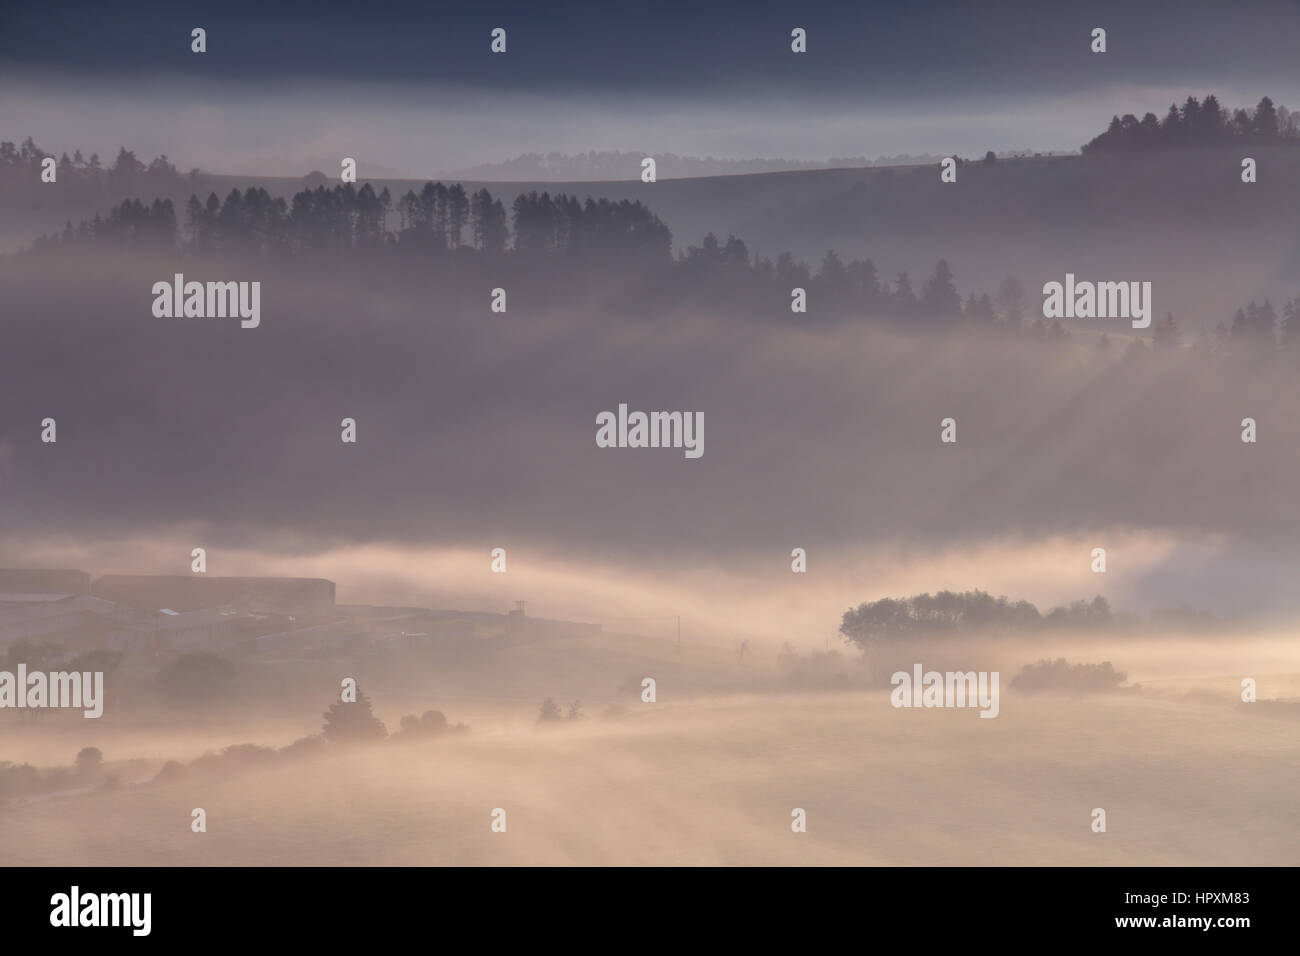 Morning fog in Alpswith hills and small trees Stock Photo